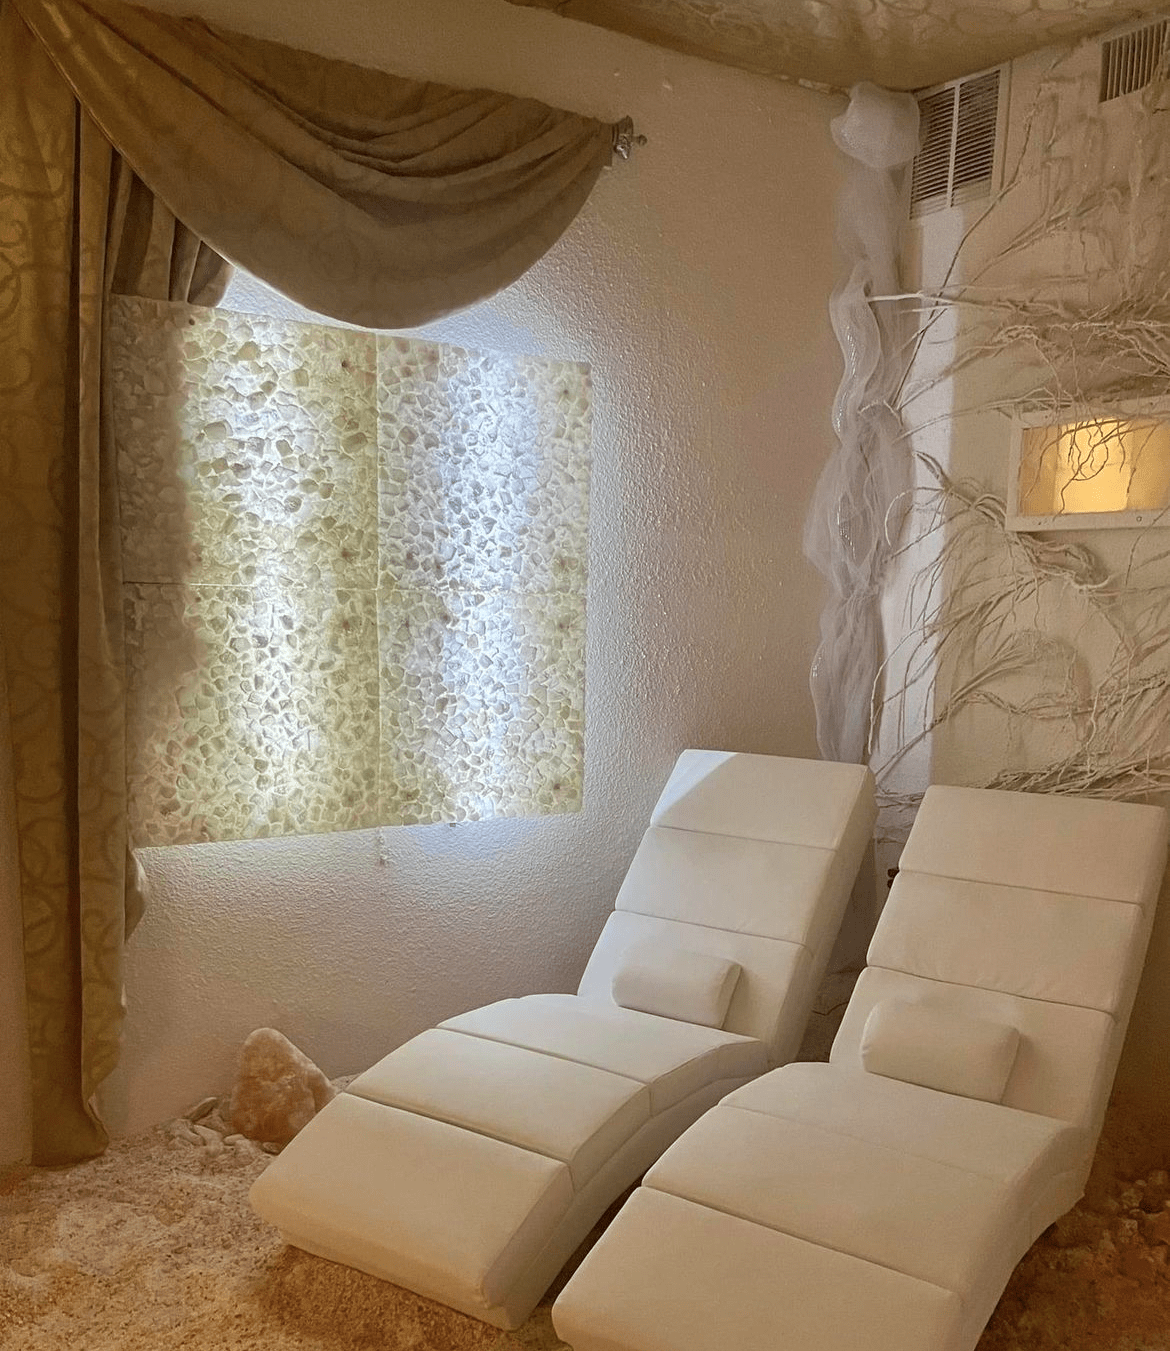 The Salt Room At 811 Salt &Amp; Vine In Flagler Beach, Florida With Two Chairs And Custom Himalayan Salt Panels On The Wall.